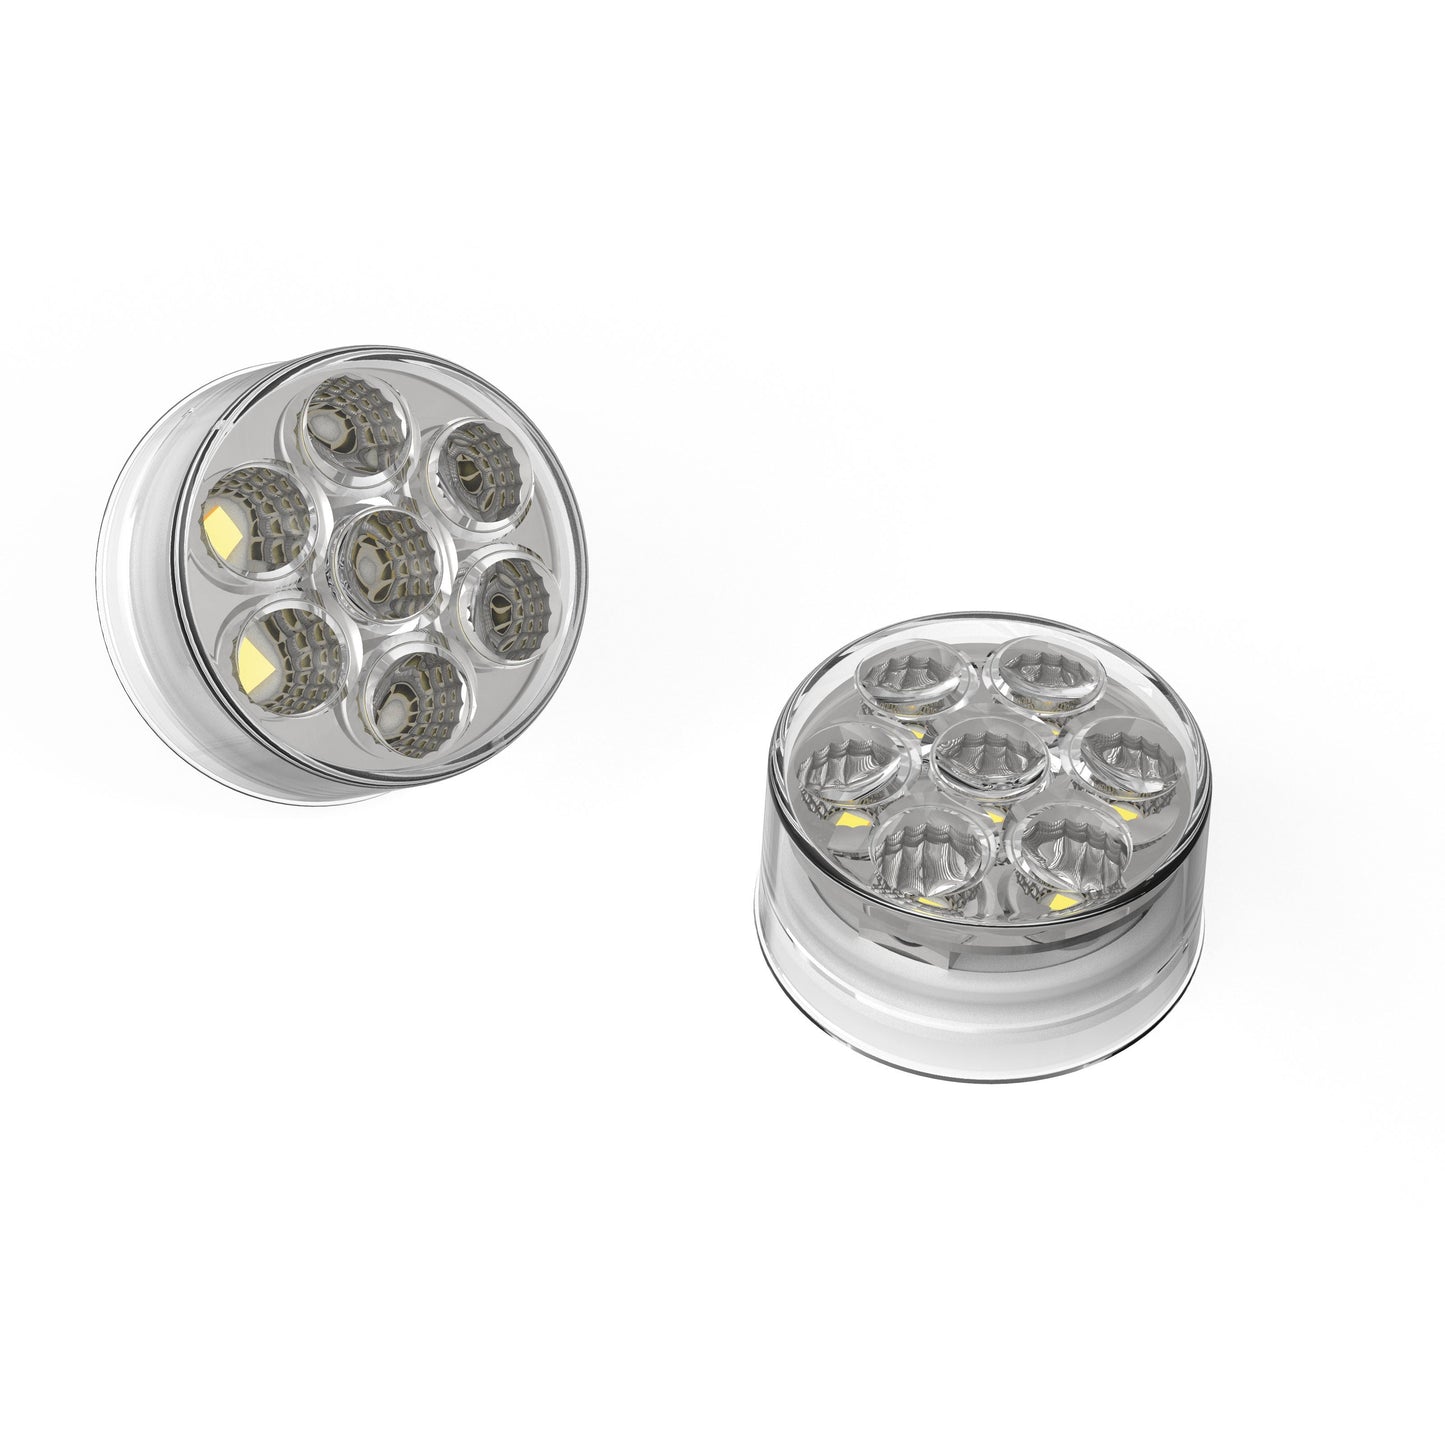 2” Round Dual Function Multivoltage Led Lights - Red & Ambar Led/Clear Lens | F238701